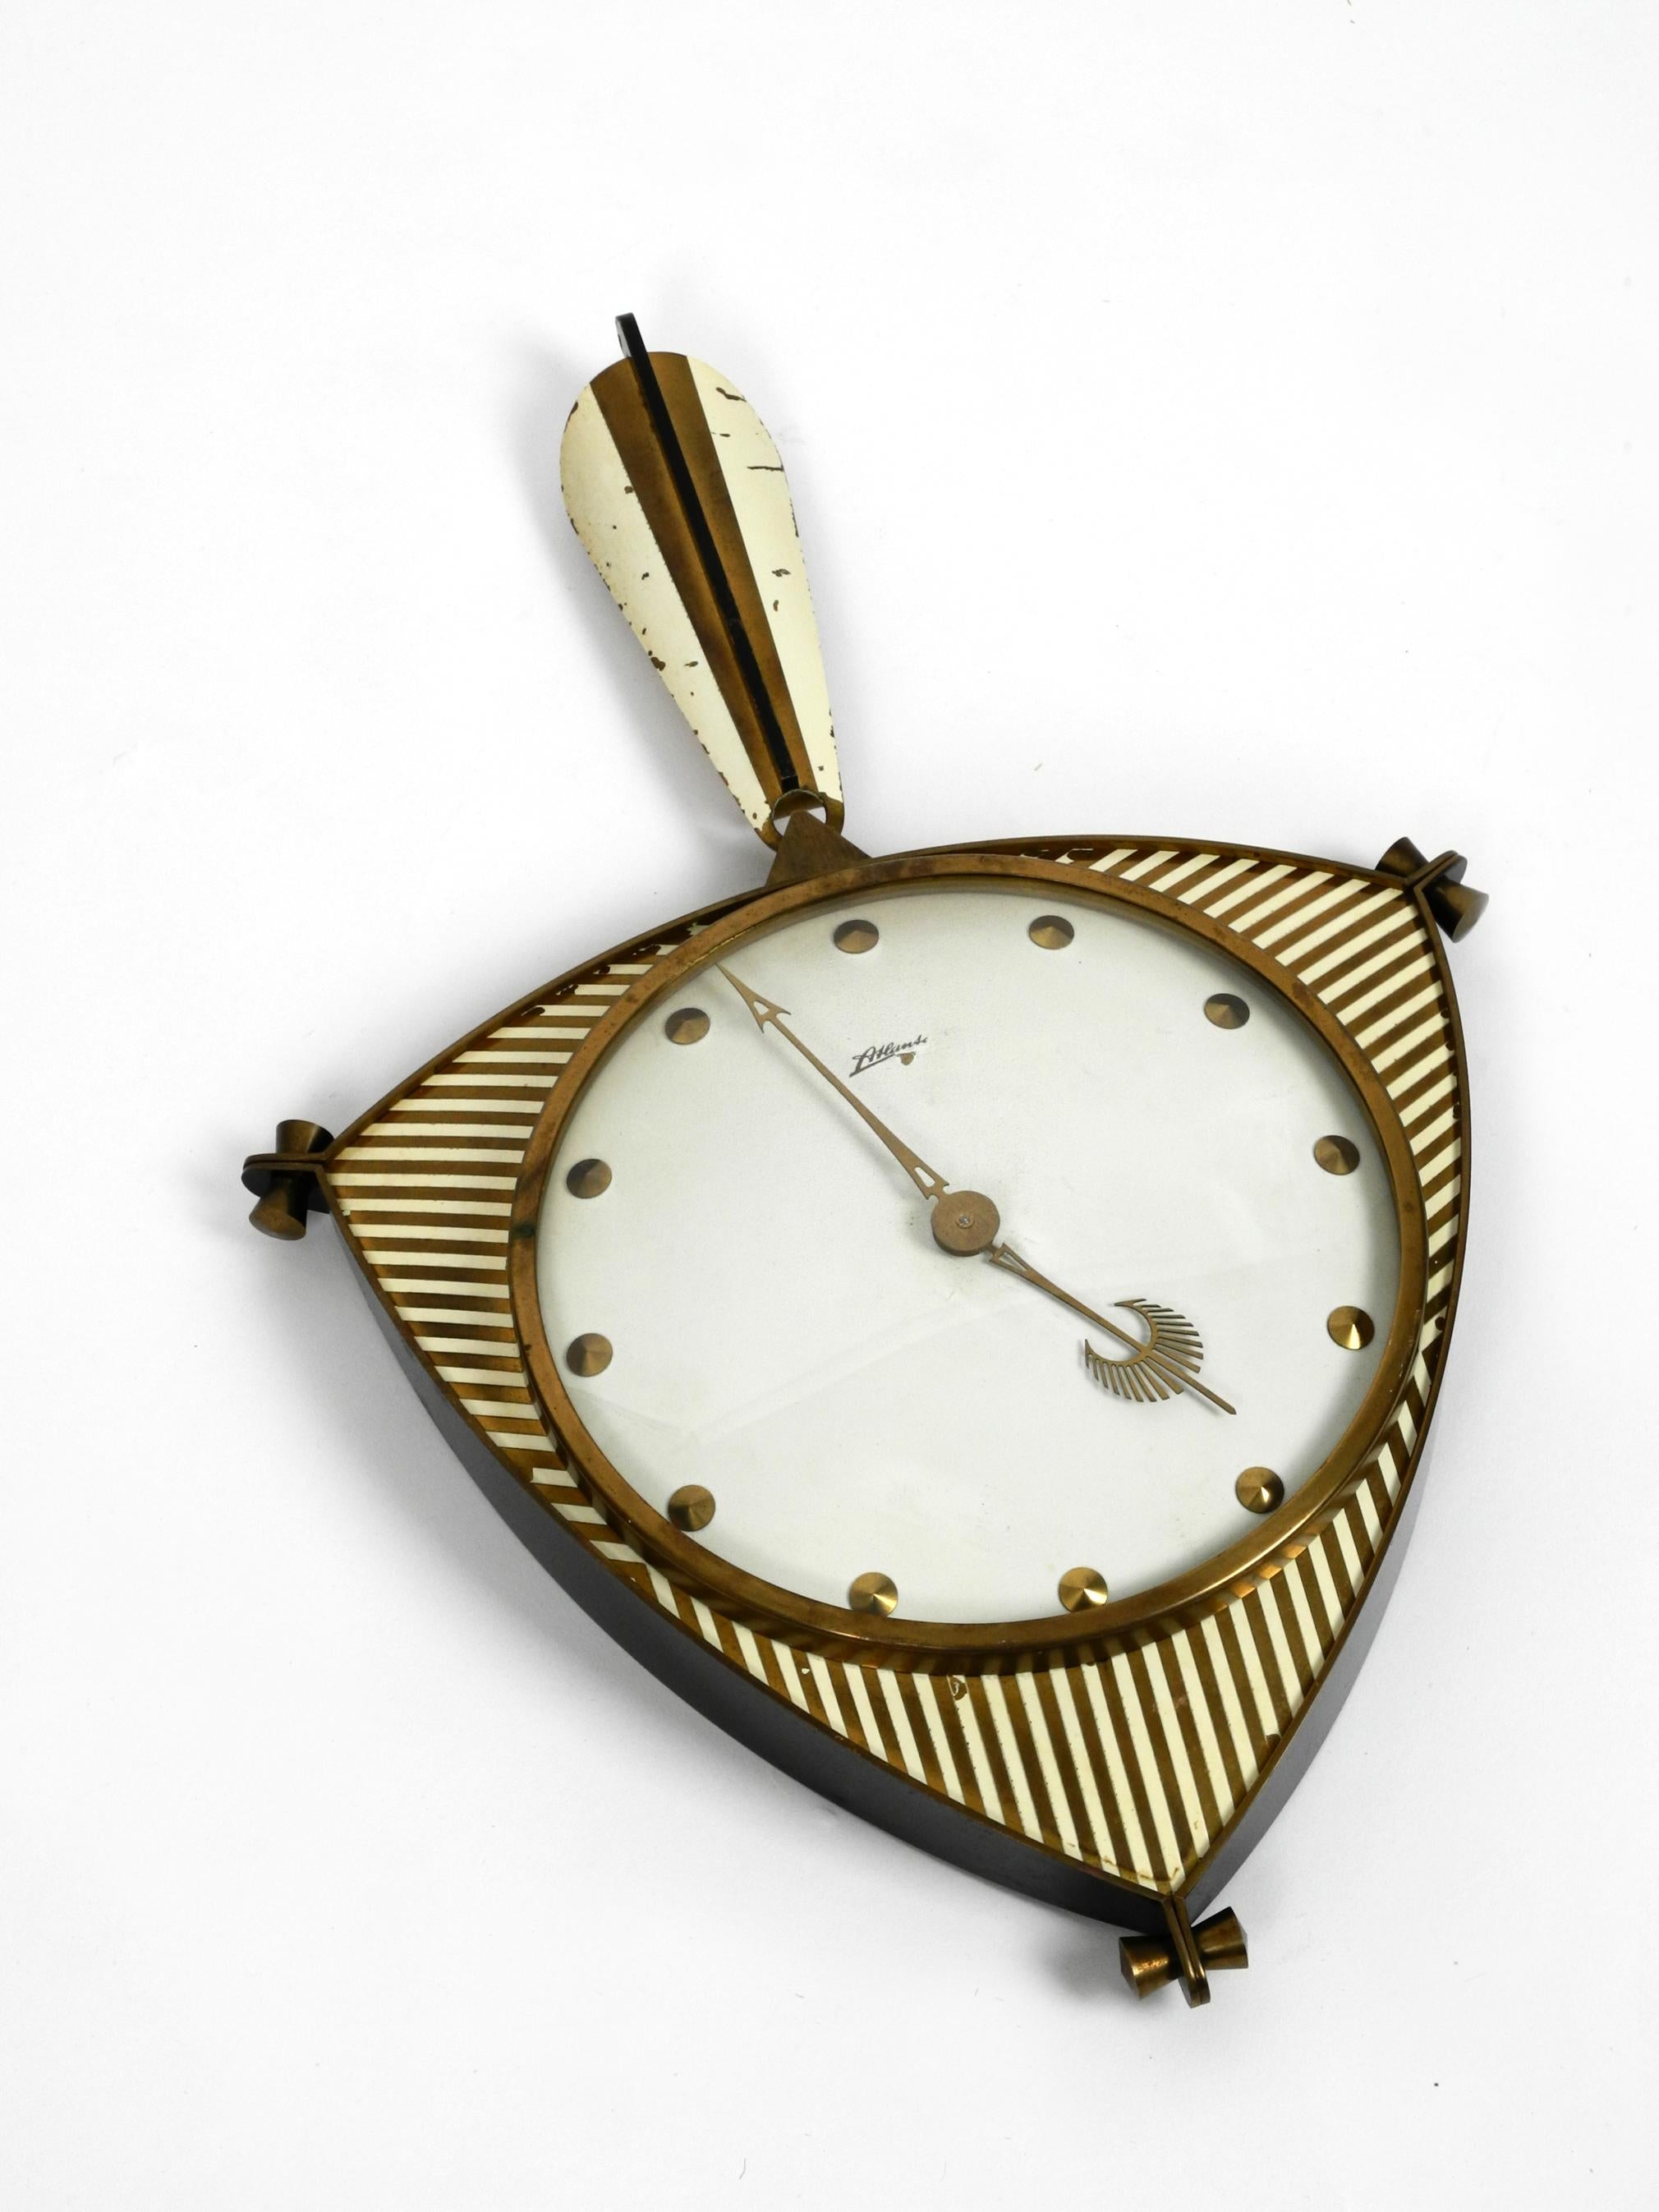 Original mechanical midcentury Atlanta wall clock. With a 10-day clockwork and gong beat: every half and each full hour. Clockwork fully functional and accurate.
Very nice and elaborate midcentury design. Housing is made of brass and metal.
100%